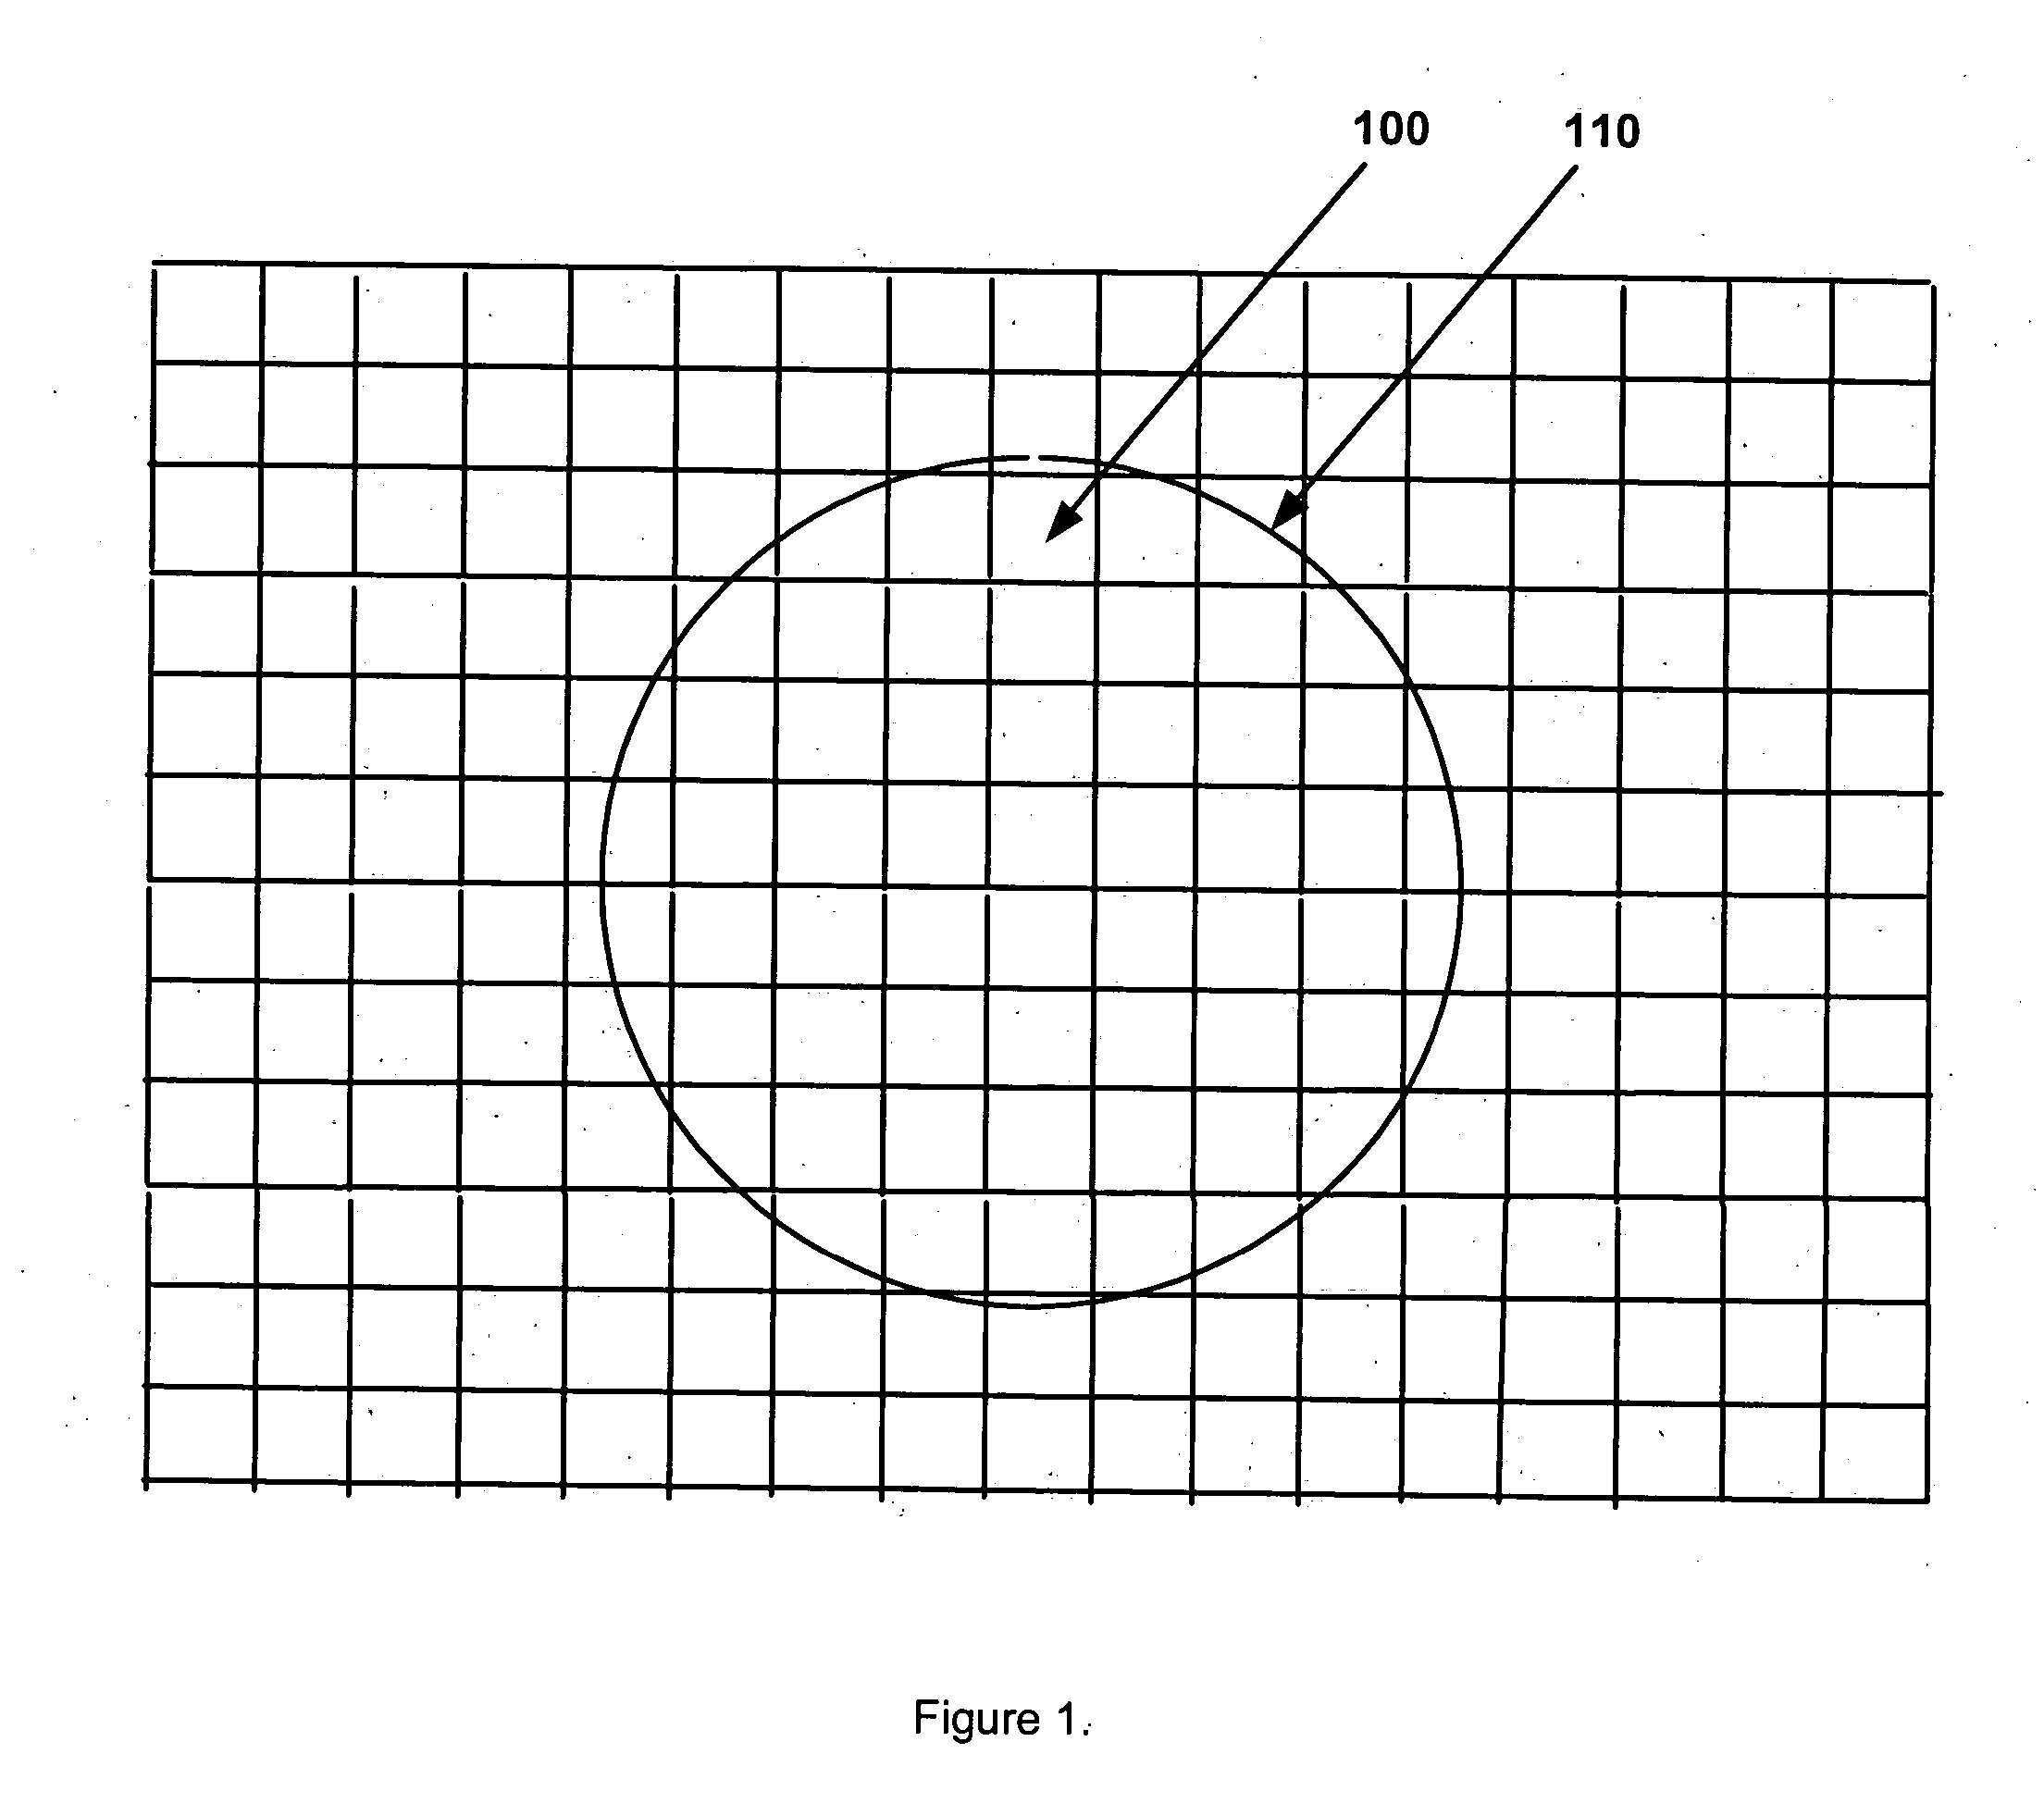 Apparatus and method for identification of biomolecules, in particular nucleic acid sequences, proteins, and antigens and antibodies